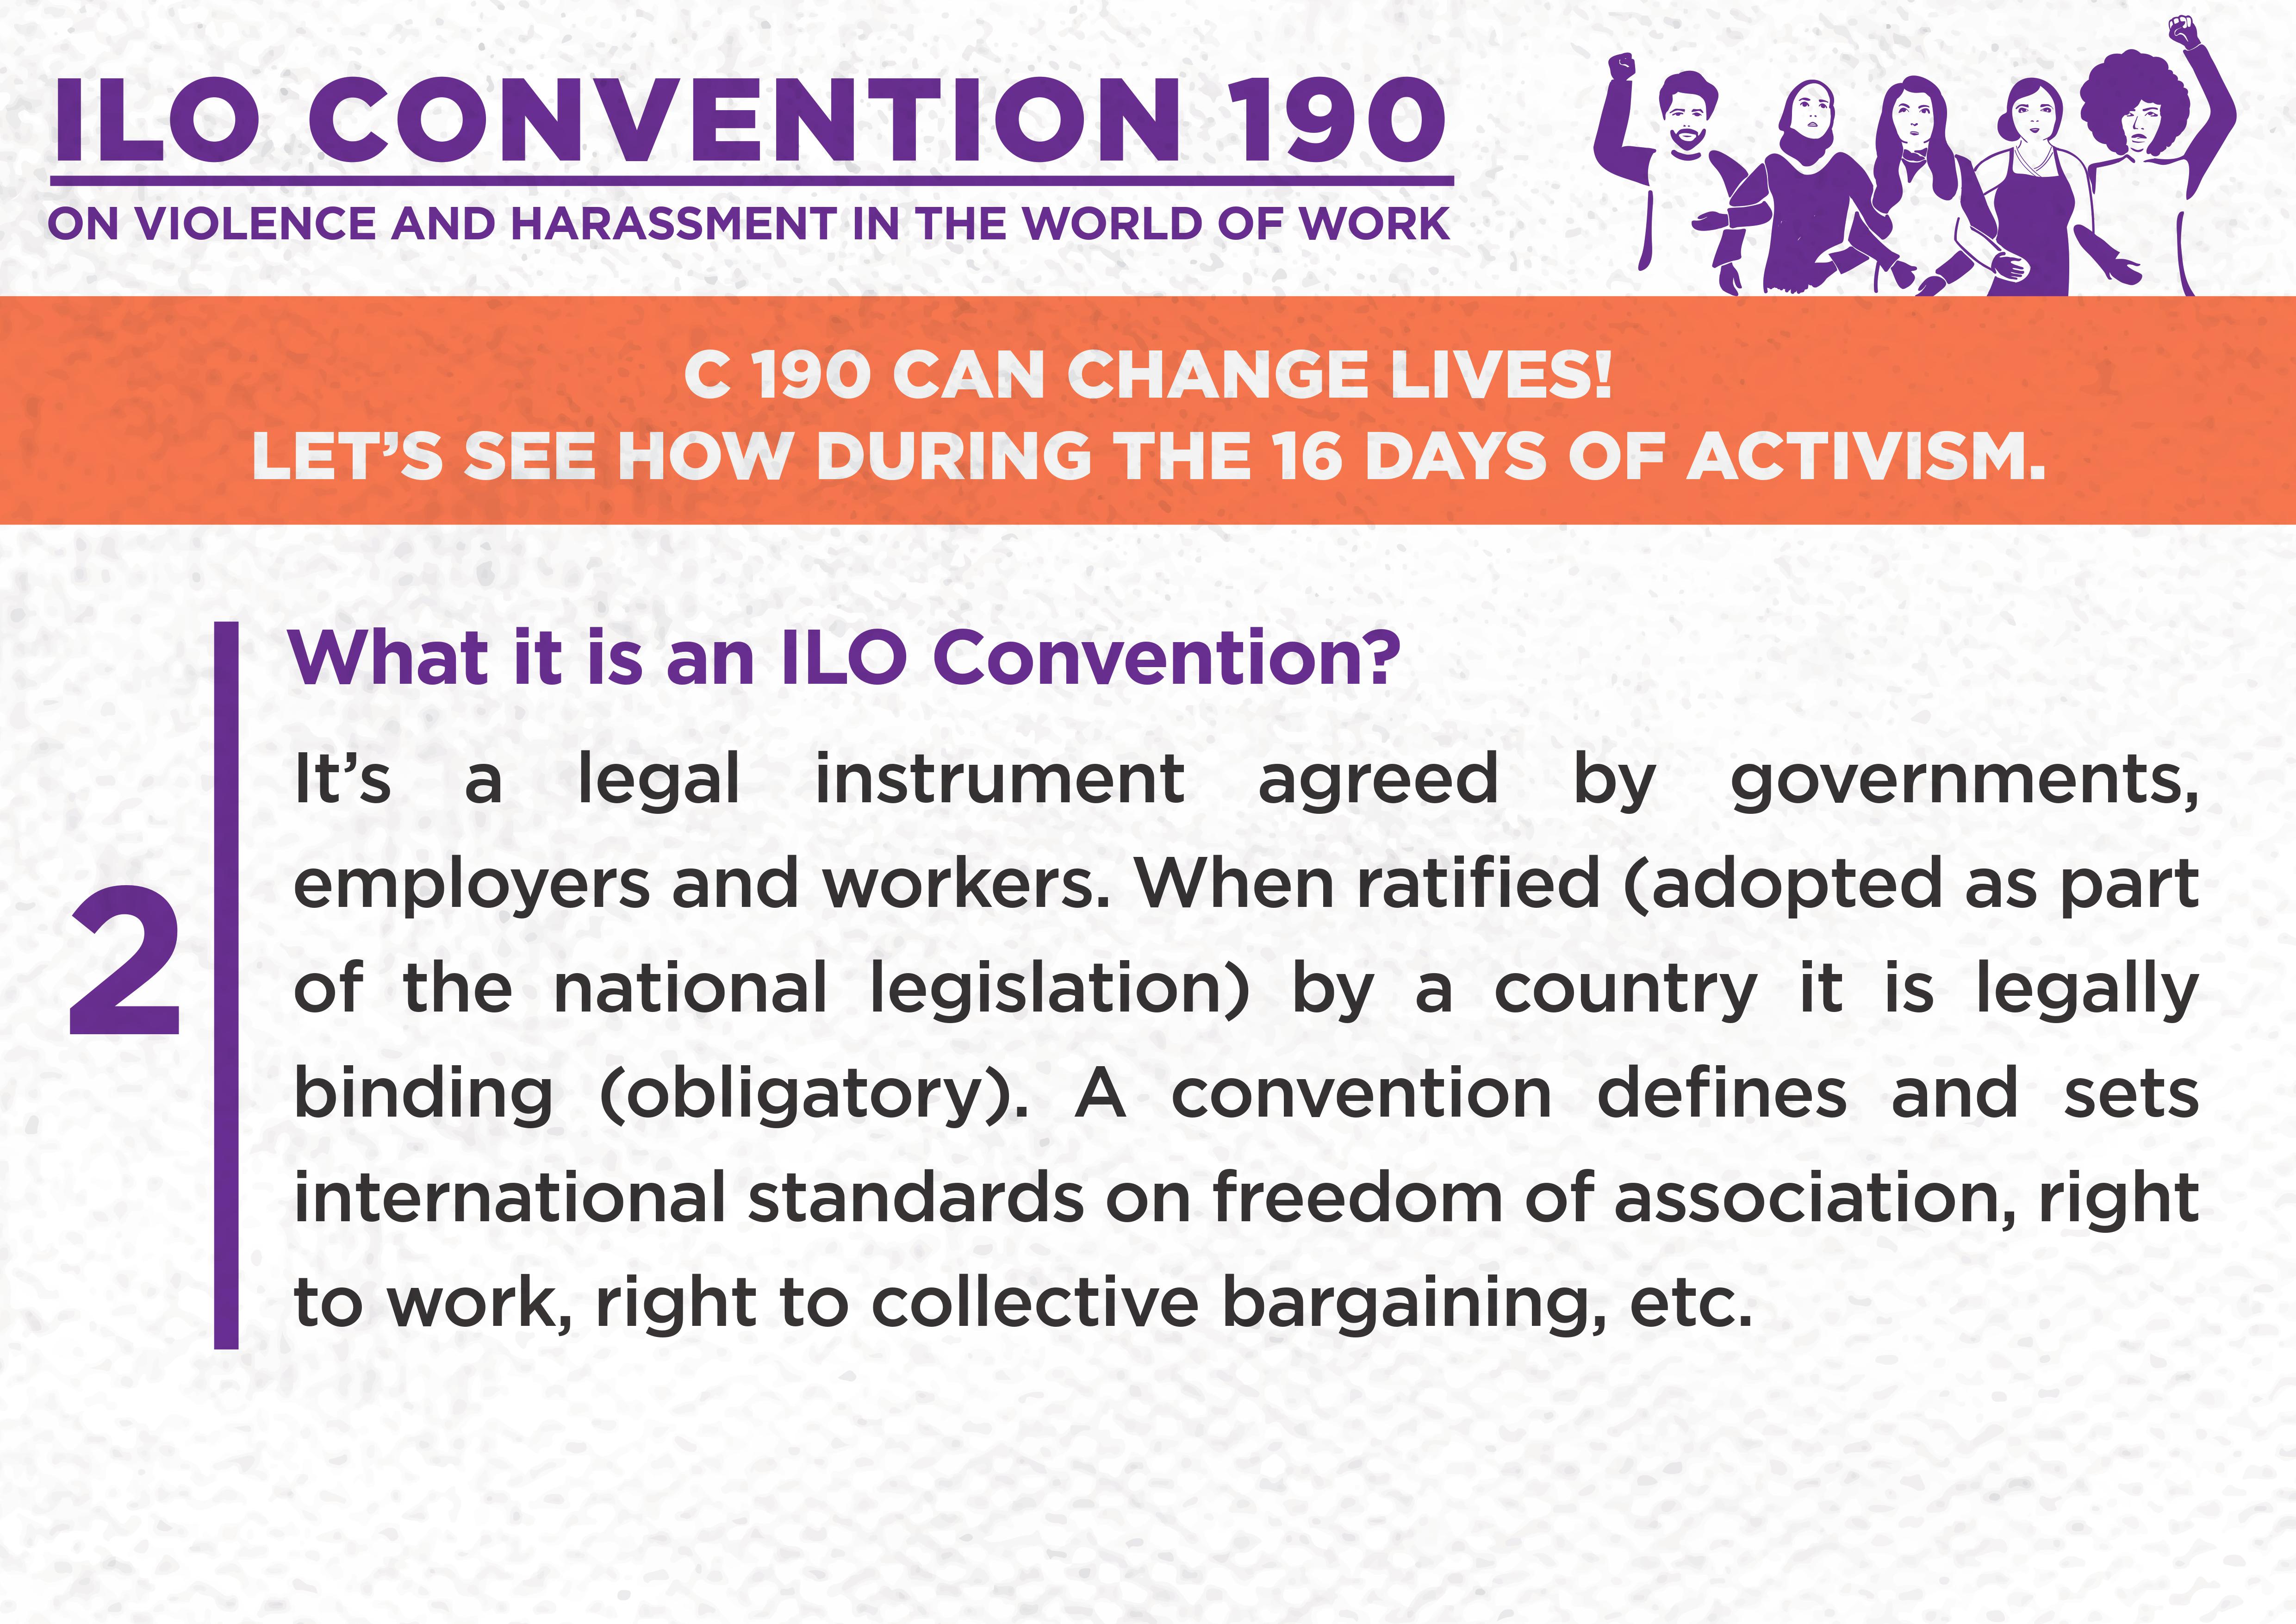 2. What it is an ILO Convention?